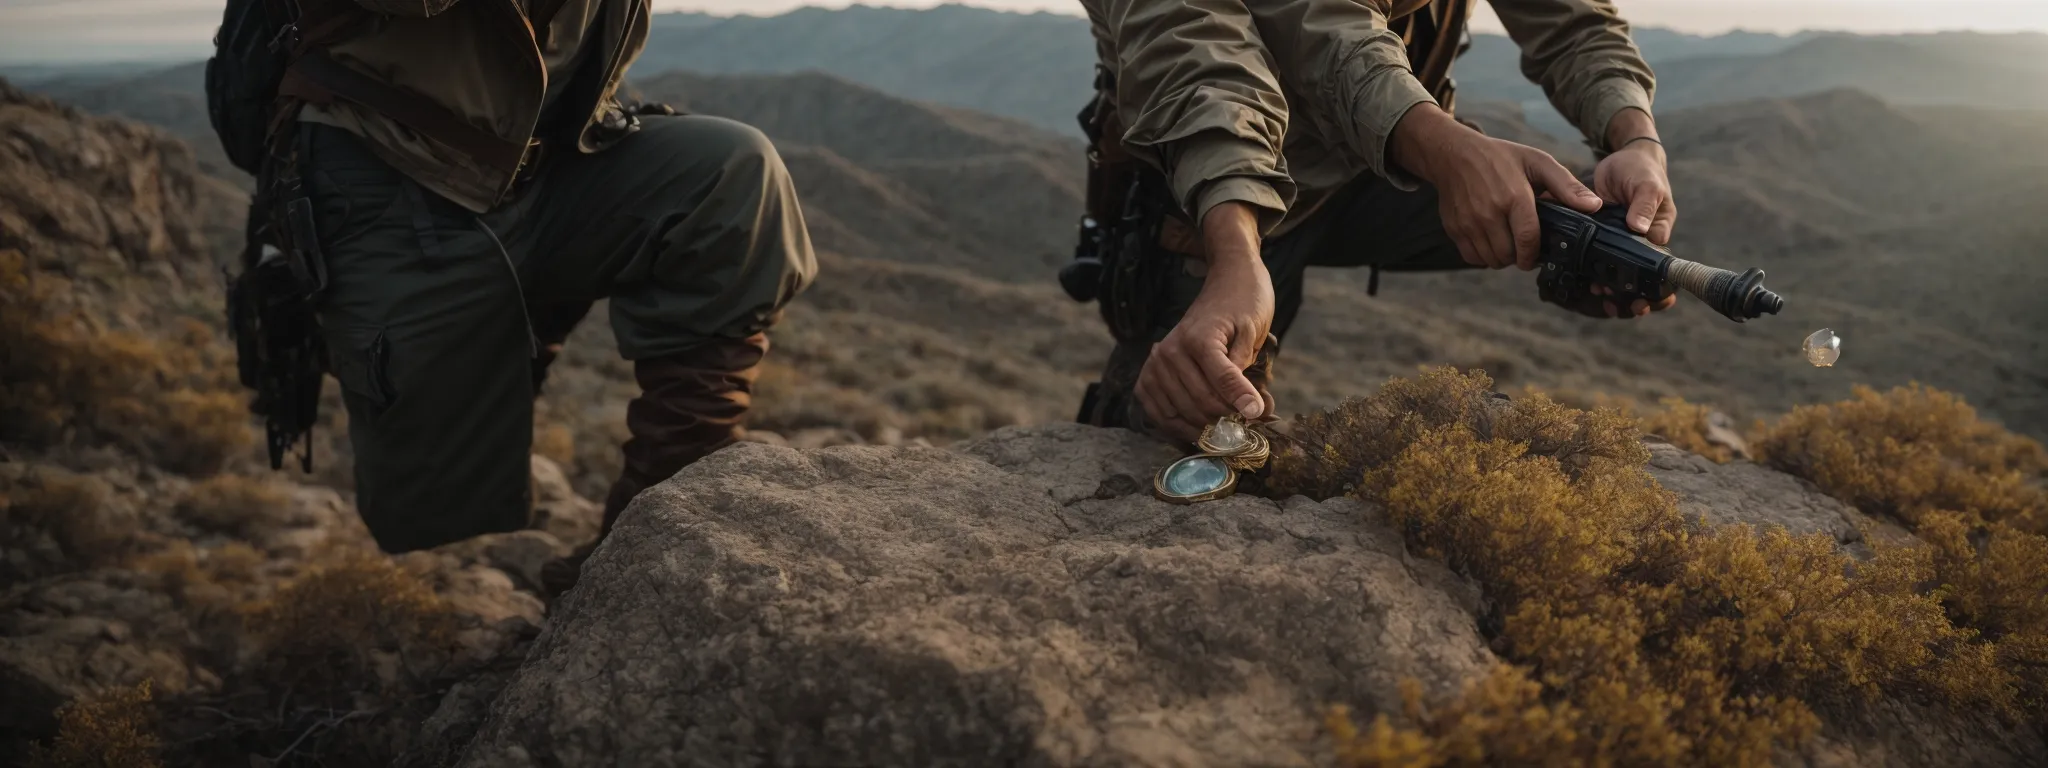 a scene of a treasure hunter wielding a sophisticated tool while delicately extracting a shining gem from a rugged landscape.